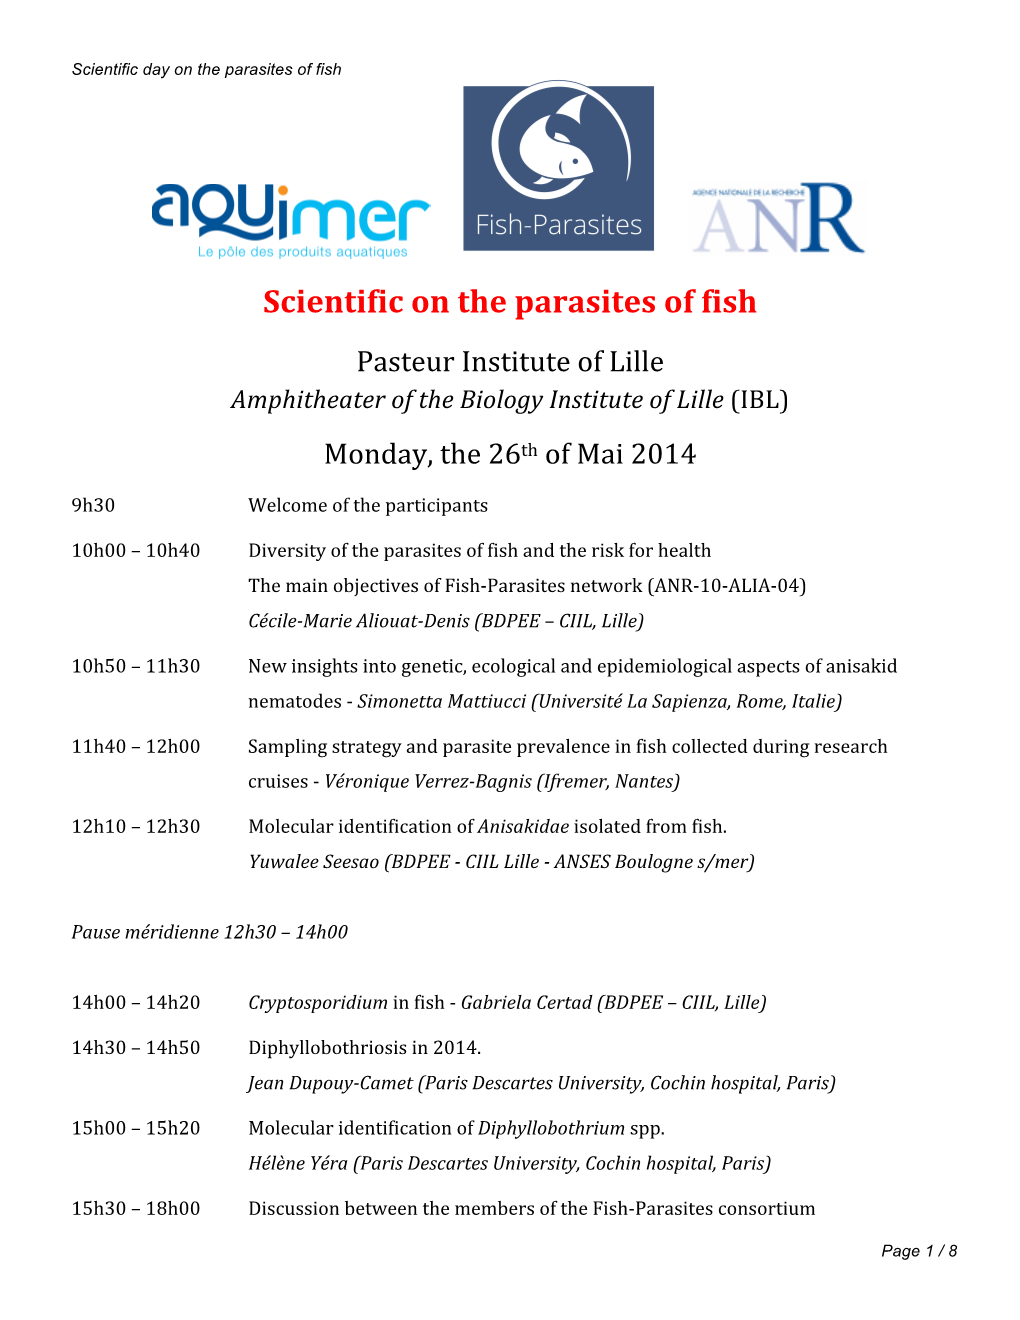 Scientific on the Parasites of Fish Pasteur Institute of Lille Amphitheater of the Biology Institute of Lille (IBL) Monday, the 26Th of Mai 2014